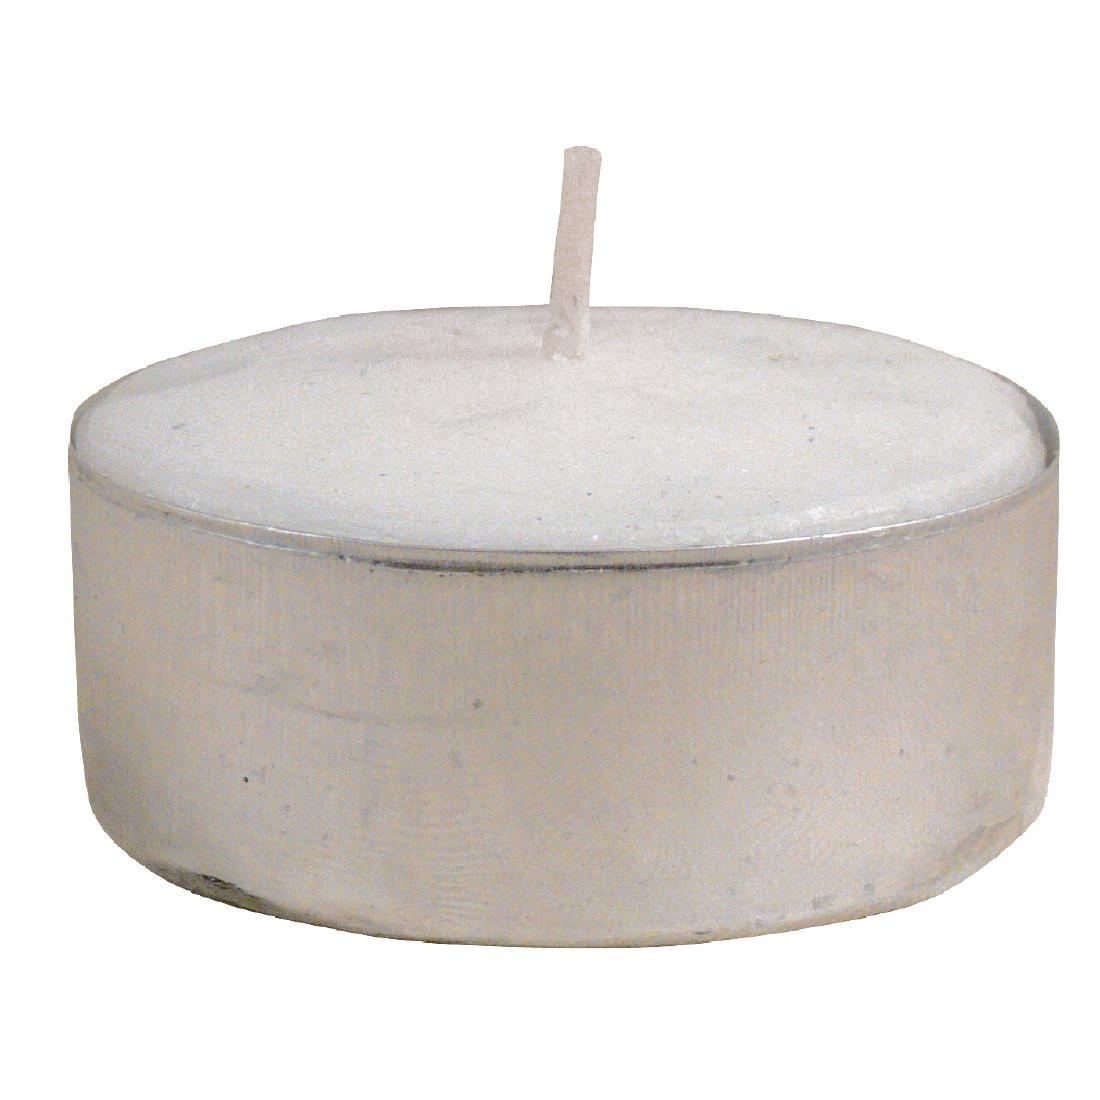 Bolsius 4 Hour Tealights (Pack of 100) - P950  - 2